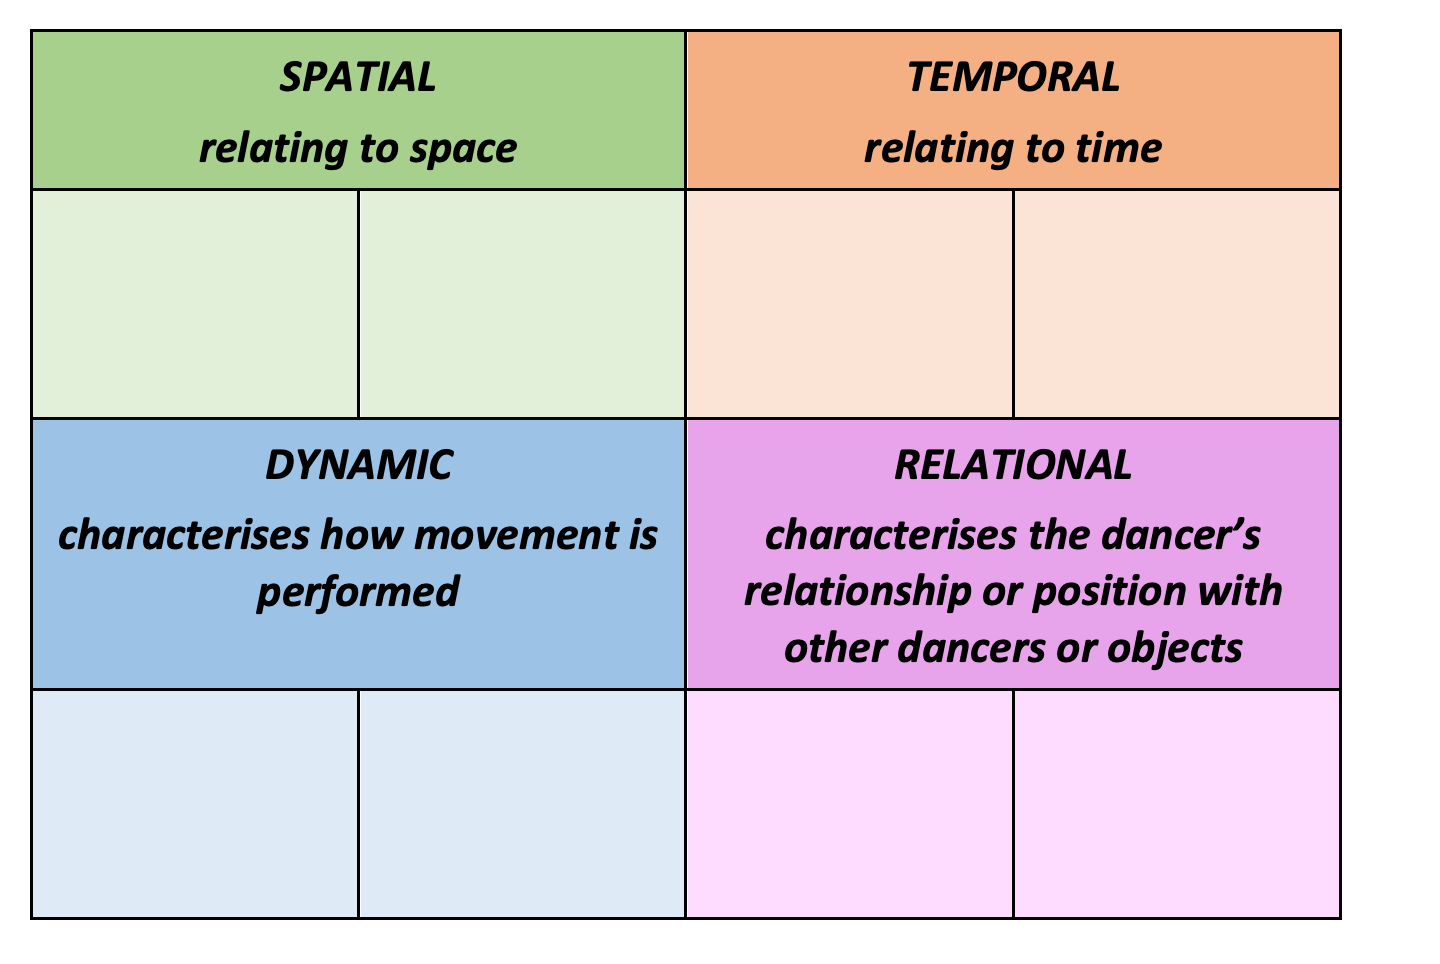 a table with four quadrants, one for each of: spatial, temporal, dynamic and relational. Students have written the following definitions for each: SPATIAL: relating to space, TEMPORAL: relating to time, DYNAMIC: characterises how movement is performed, RELATIONAL: characterises the dancer’s relationship or position with other dancers or objects.